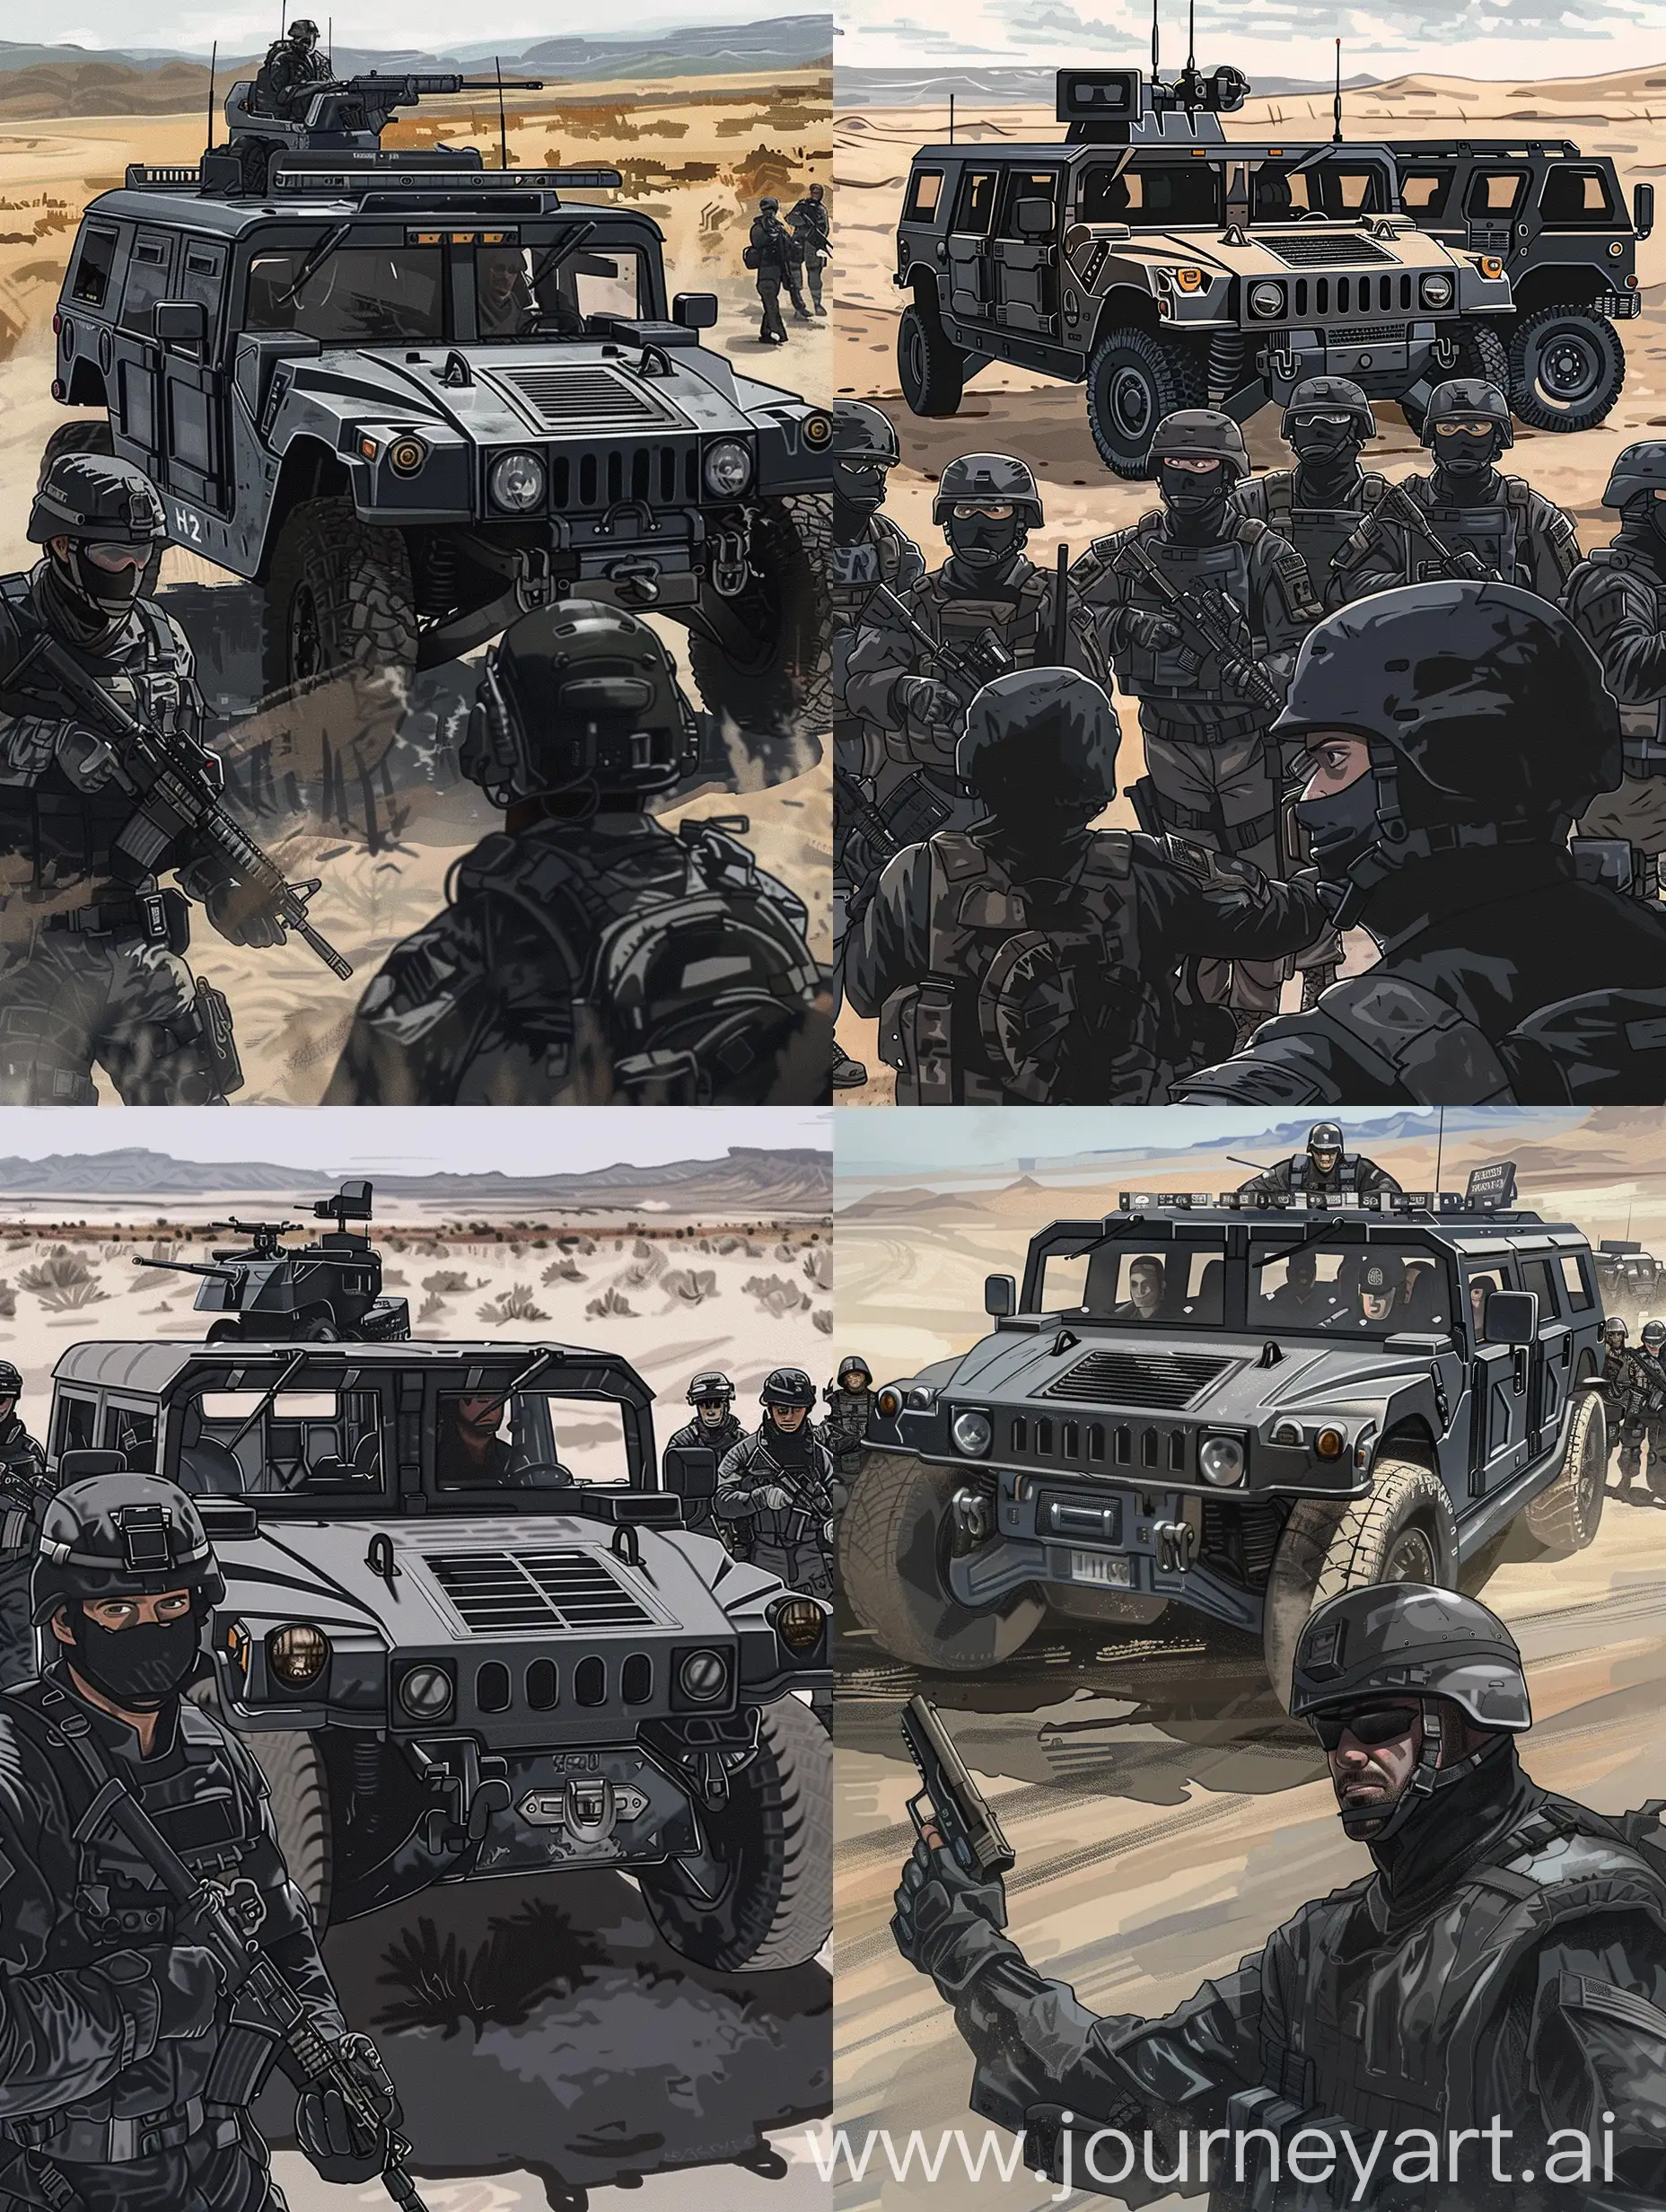 A group of soldiers dressed in black and in front of them Josh Dummel is wearing a black military uniform and has a gun in his hand, in the background the Rescue H2 HUMMER car has a black military design, black and gray color predominance, the soldiers' vehicle is the H2 HUMMER rescue car, drawn in Concept art style, desert view in the background, daytime